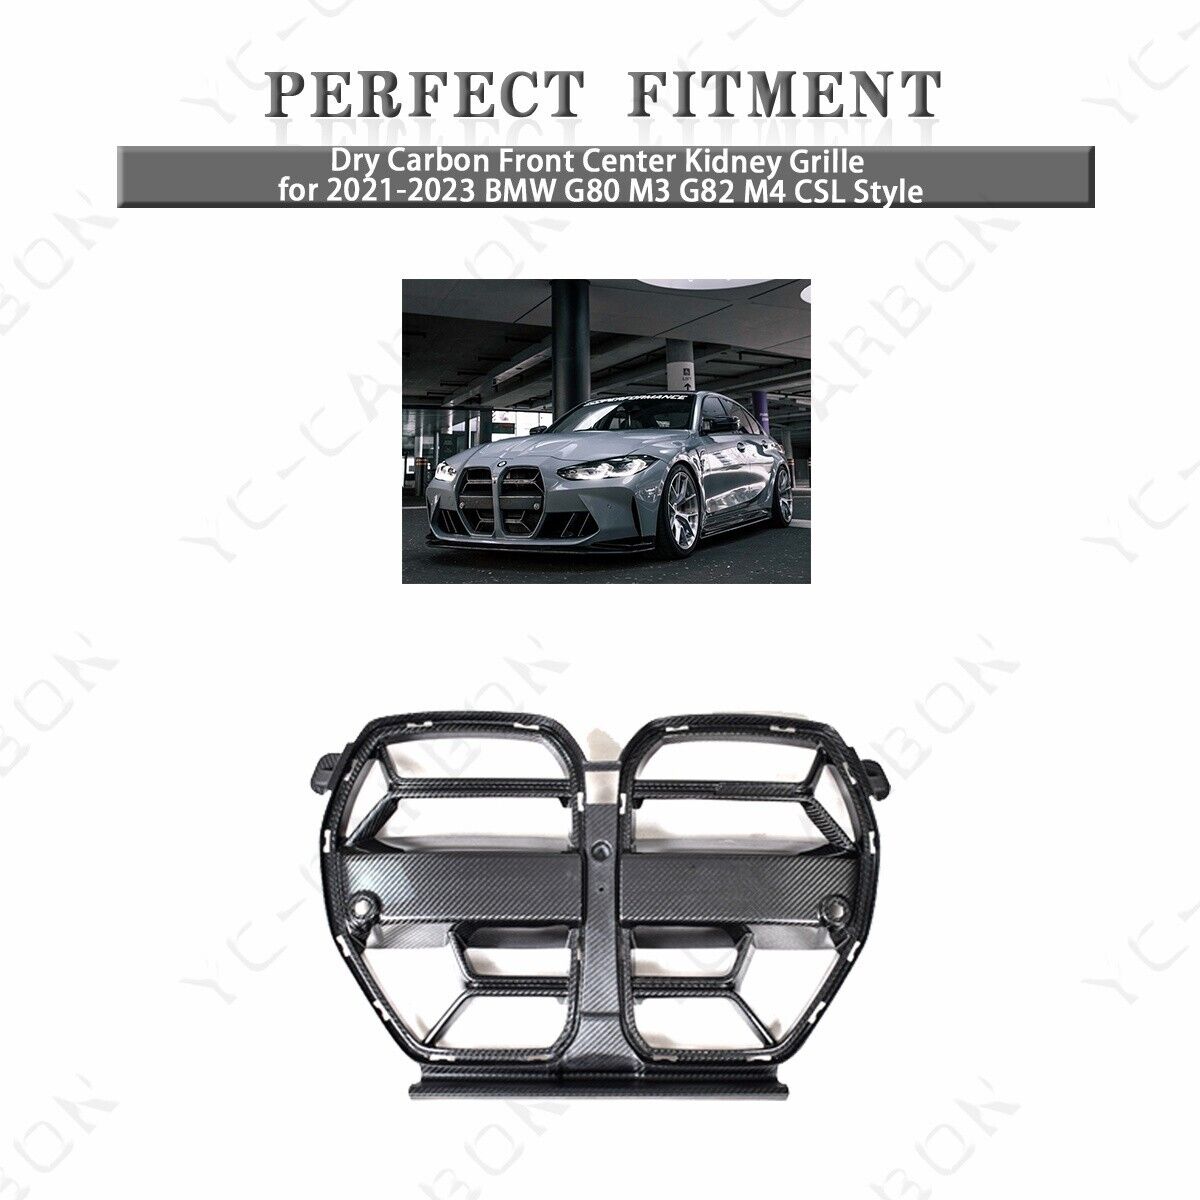 Dry Carbon Front Center Kidney Grille for 2021-2023 BMW G80 M3 G82 M4 CSL Style